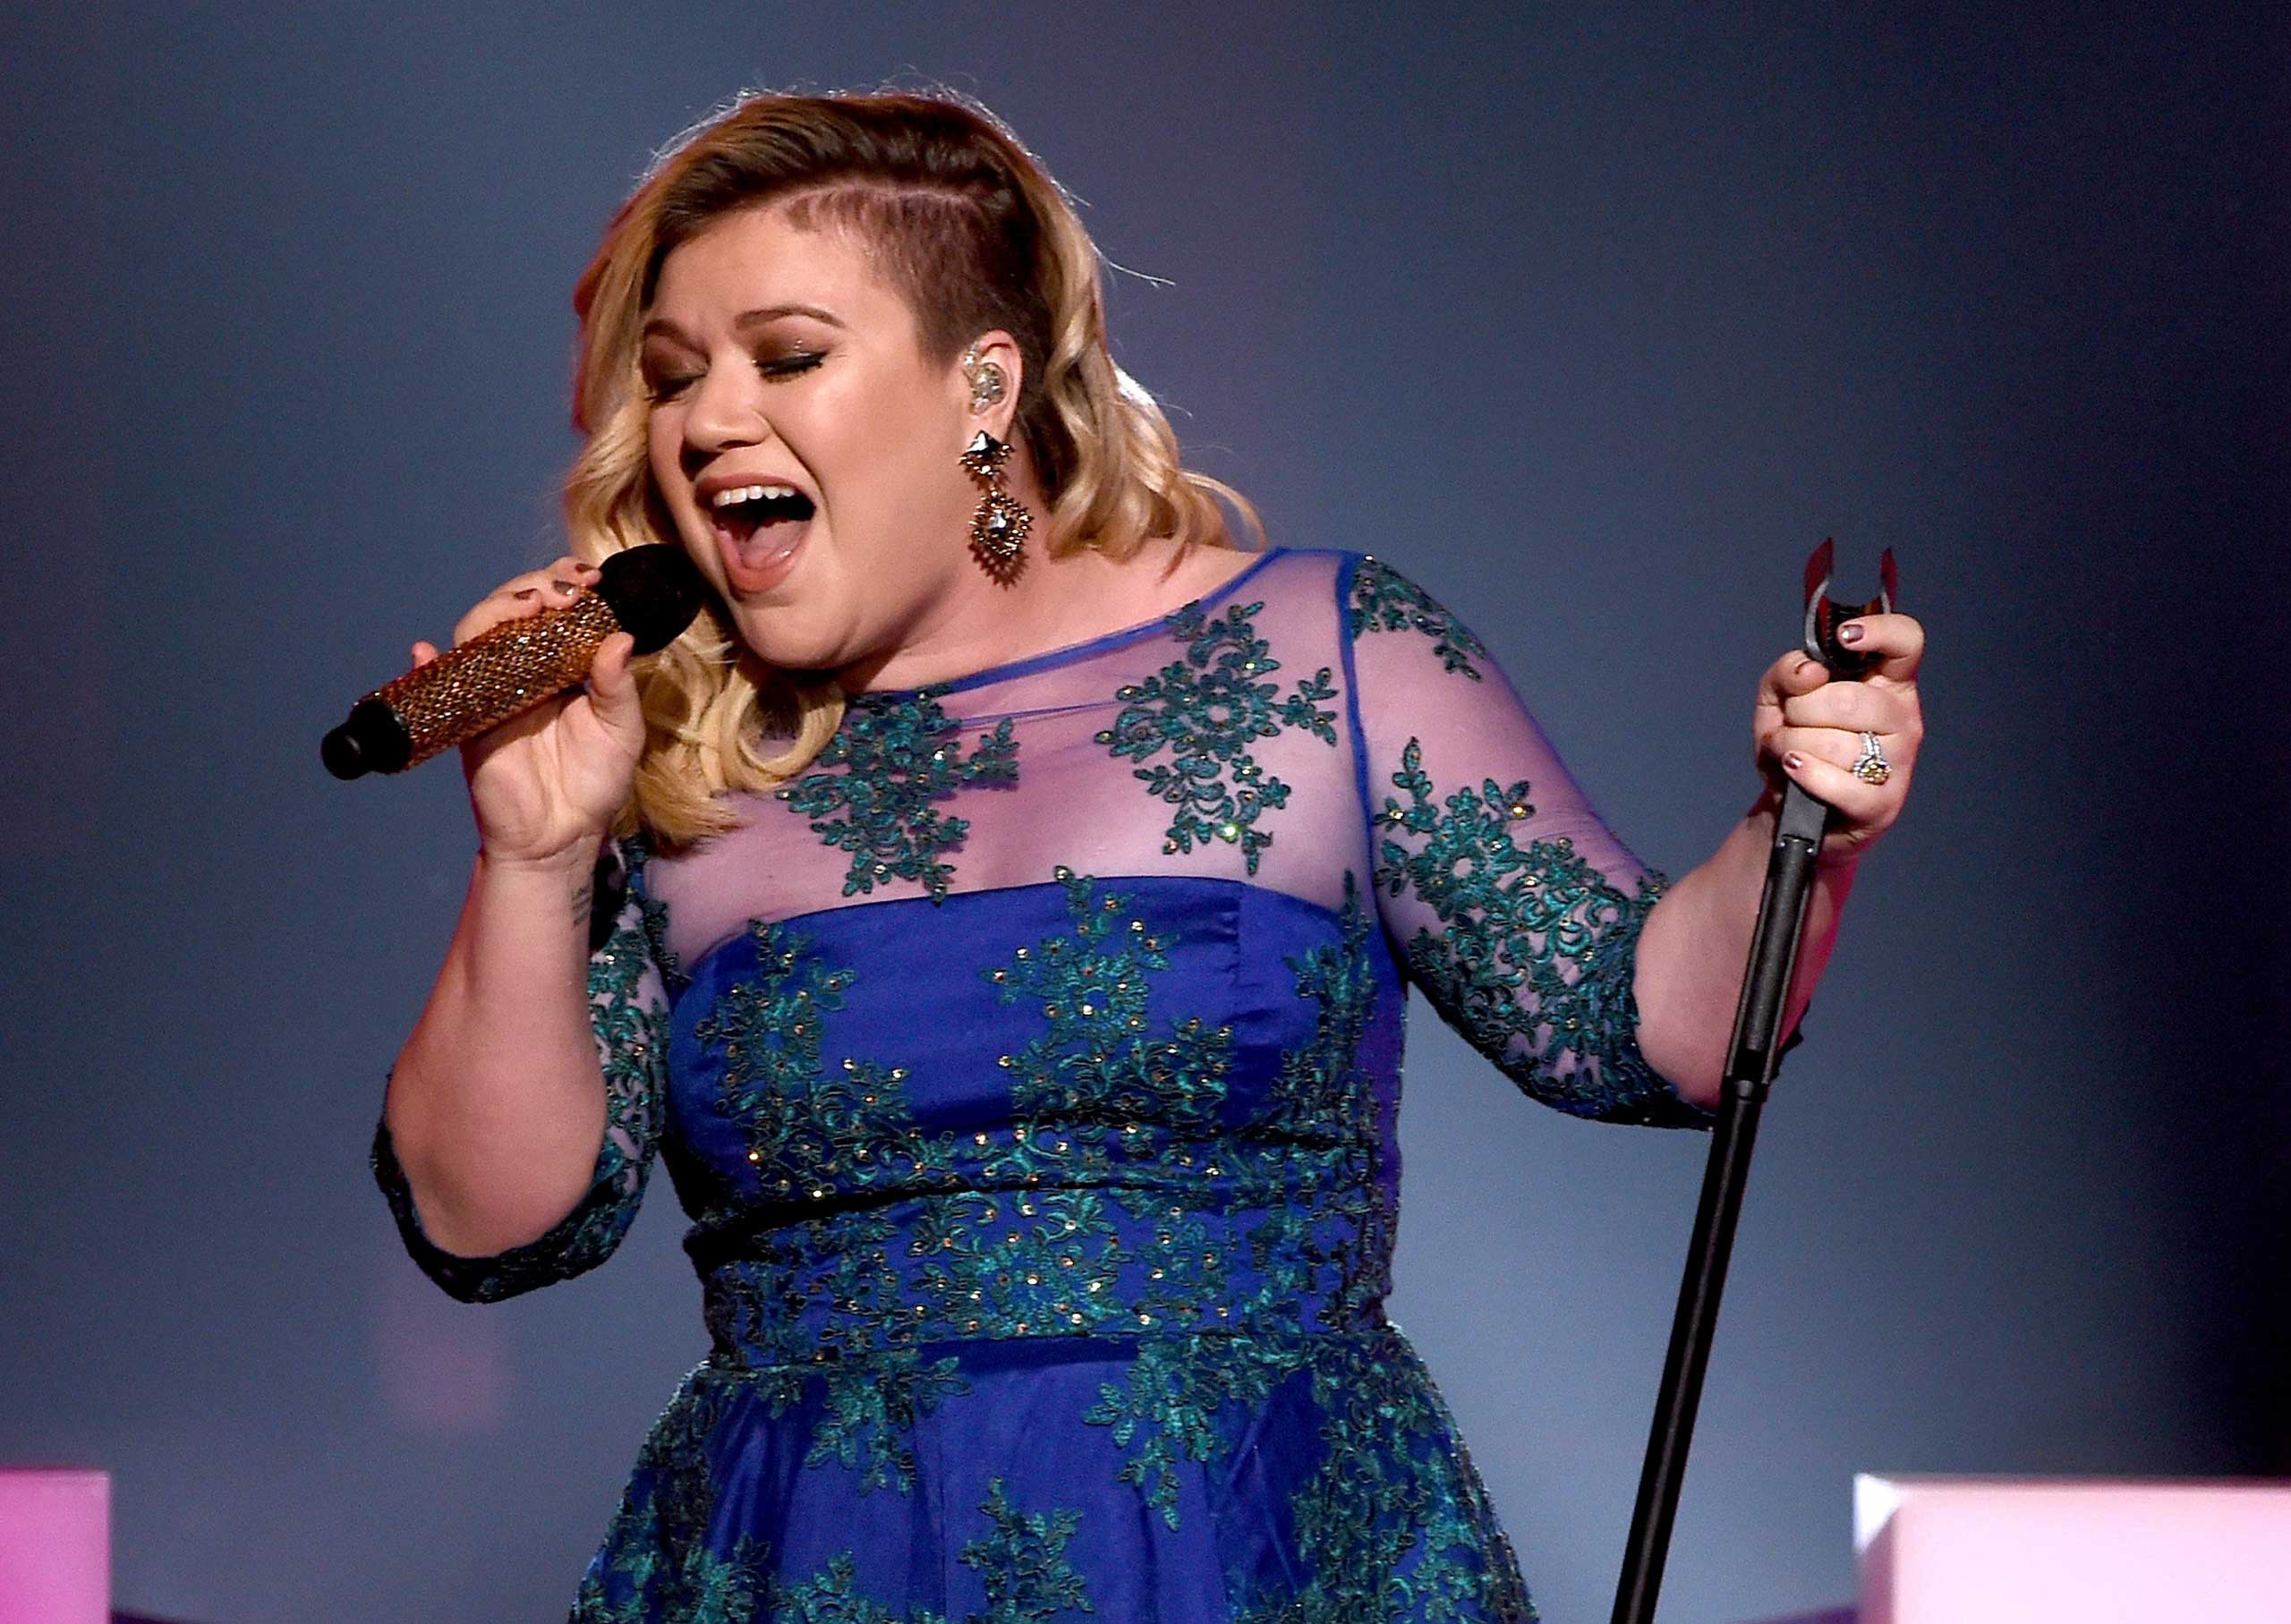 Singer Kelly Clarkson performs during the 2015 iHeartRadio Music Awards which broadcasted live on NBC from The Shrine Auditorium in Los Angeles on March 29, 2015. (Kevin Winter—Getty Images for iHeartMedia)